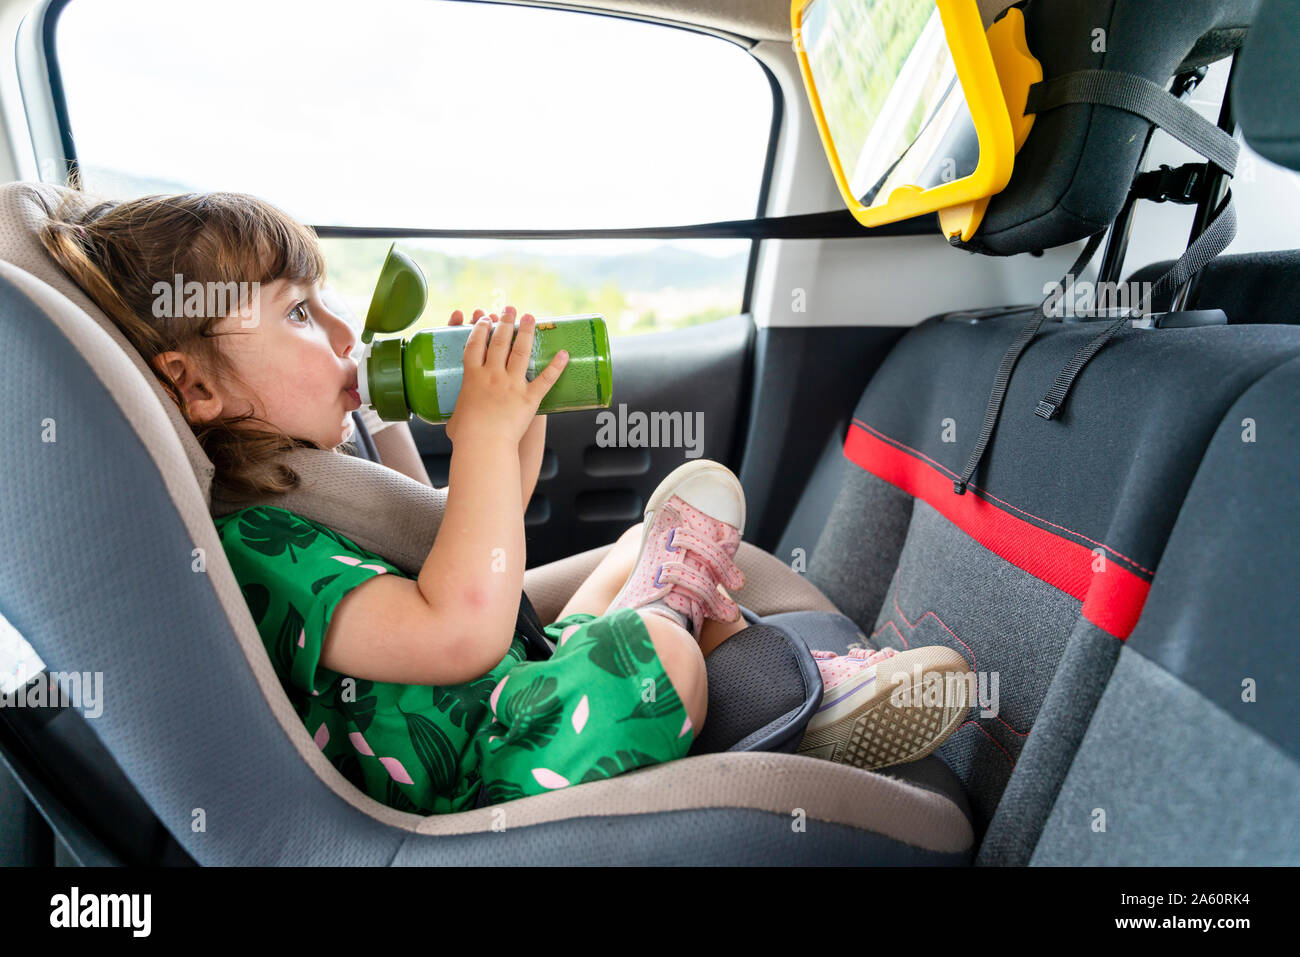 Toddler girl sitting on a car seat with a mirror drinking water Stock Photo